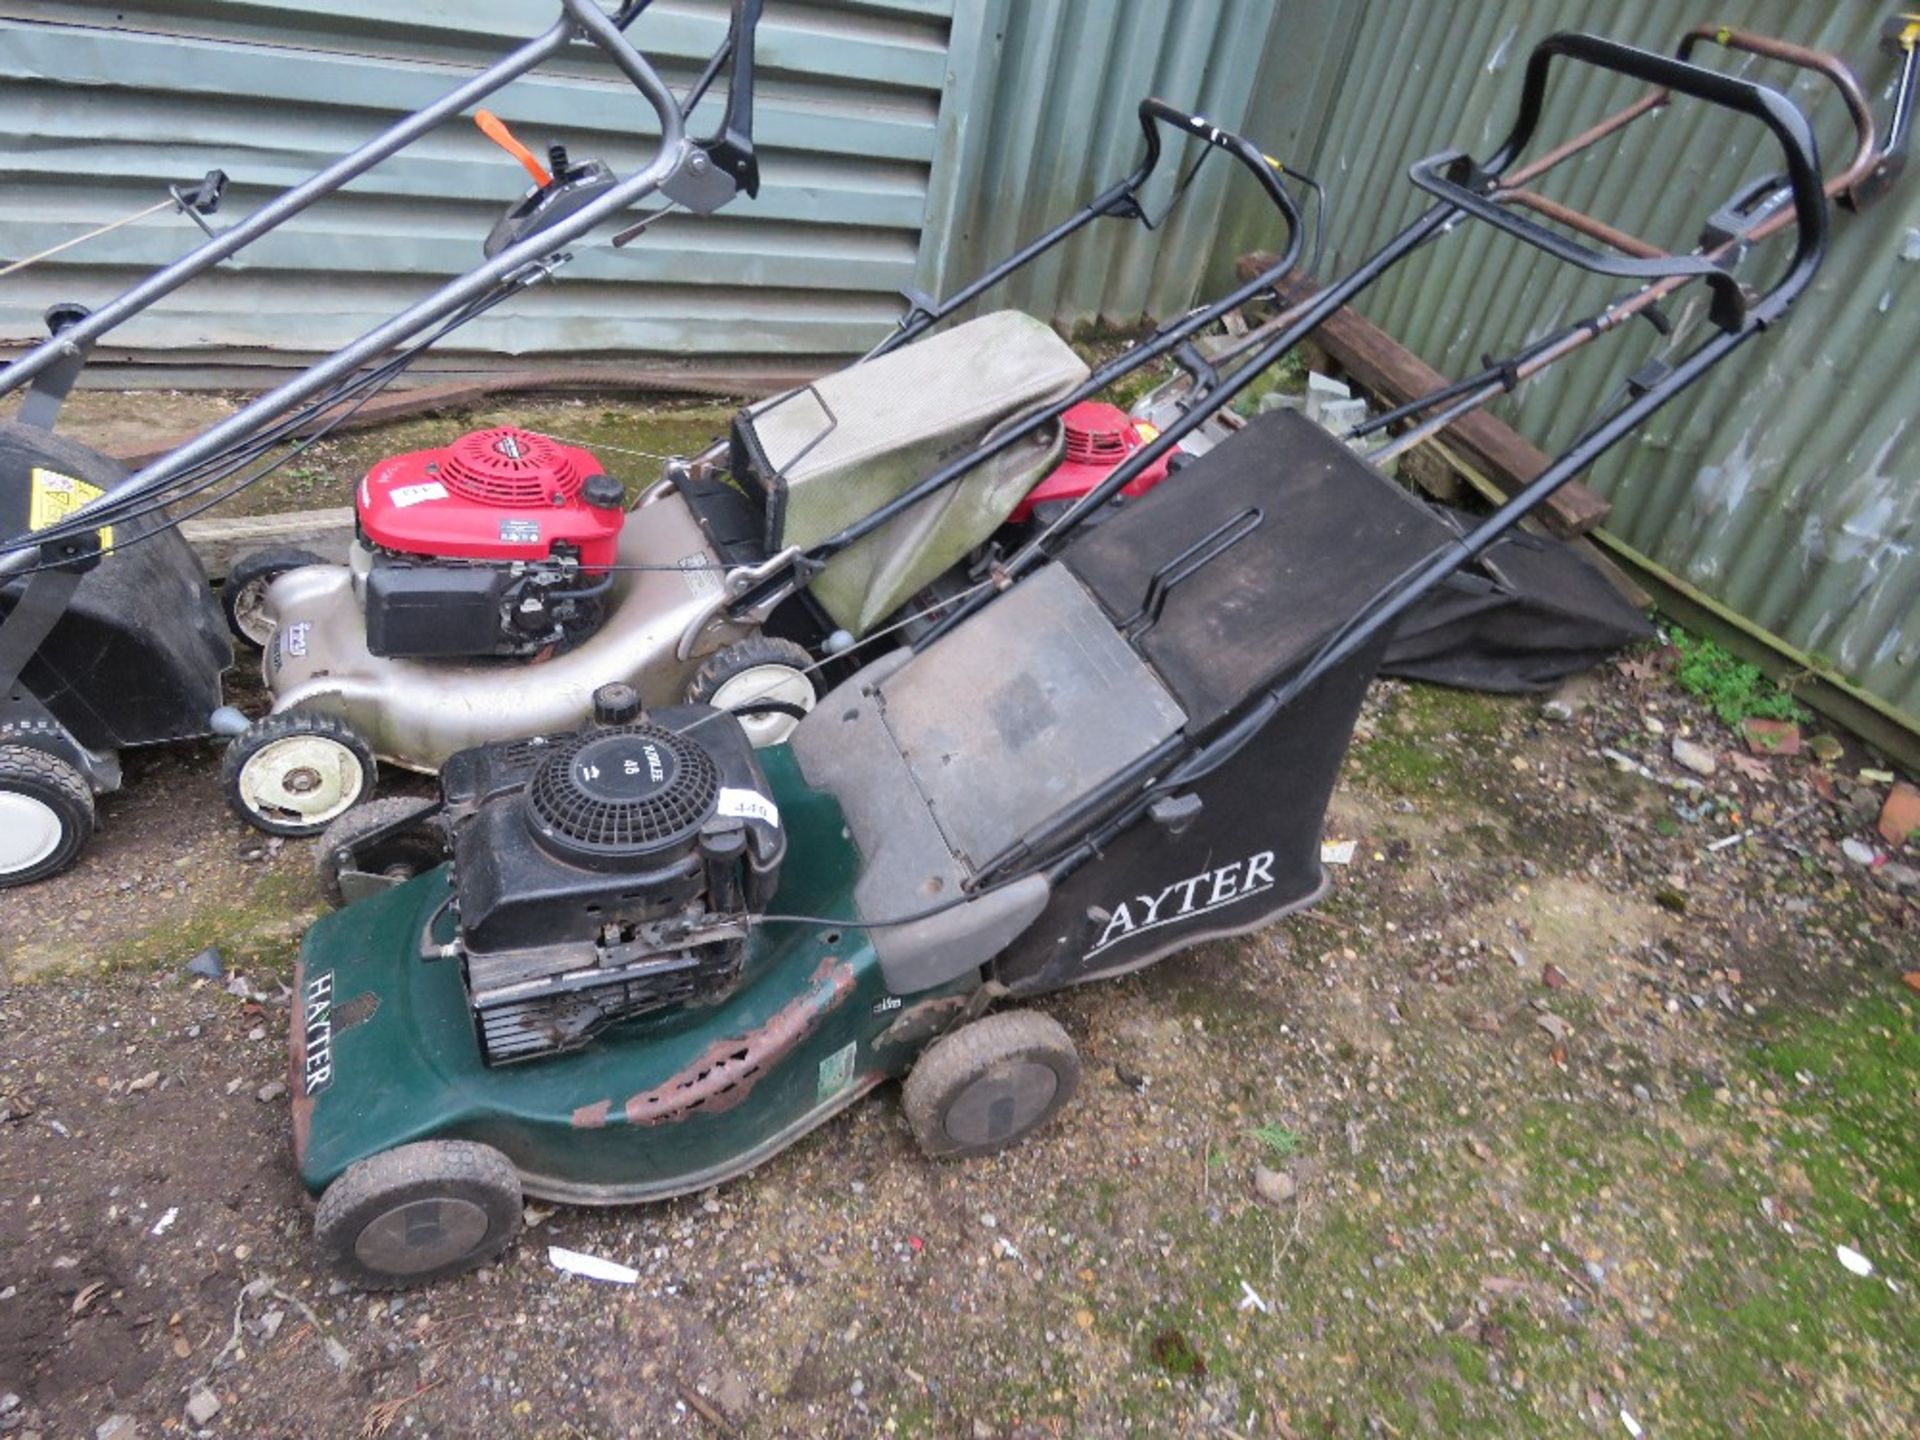 HAYTER JUBILEE 48 MOWER WITH A COLLECTOR BAG. THIS LOT IS SOLD UNDER THE AUCTIONEERS MARGIN SCHEM - Image 2 of 4